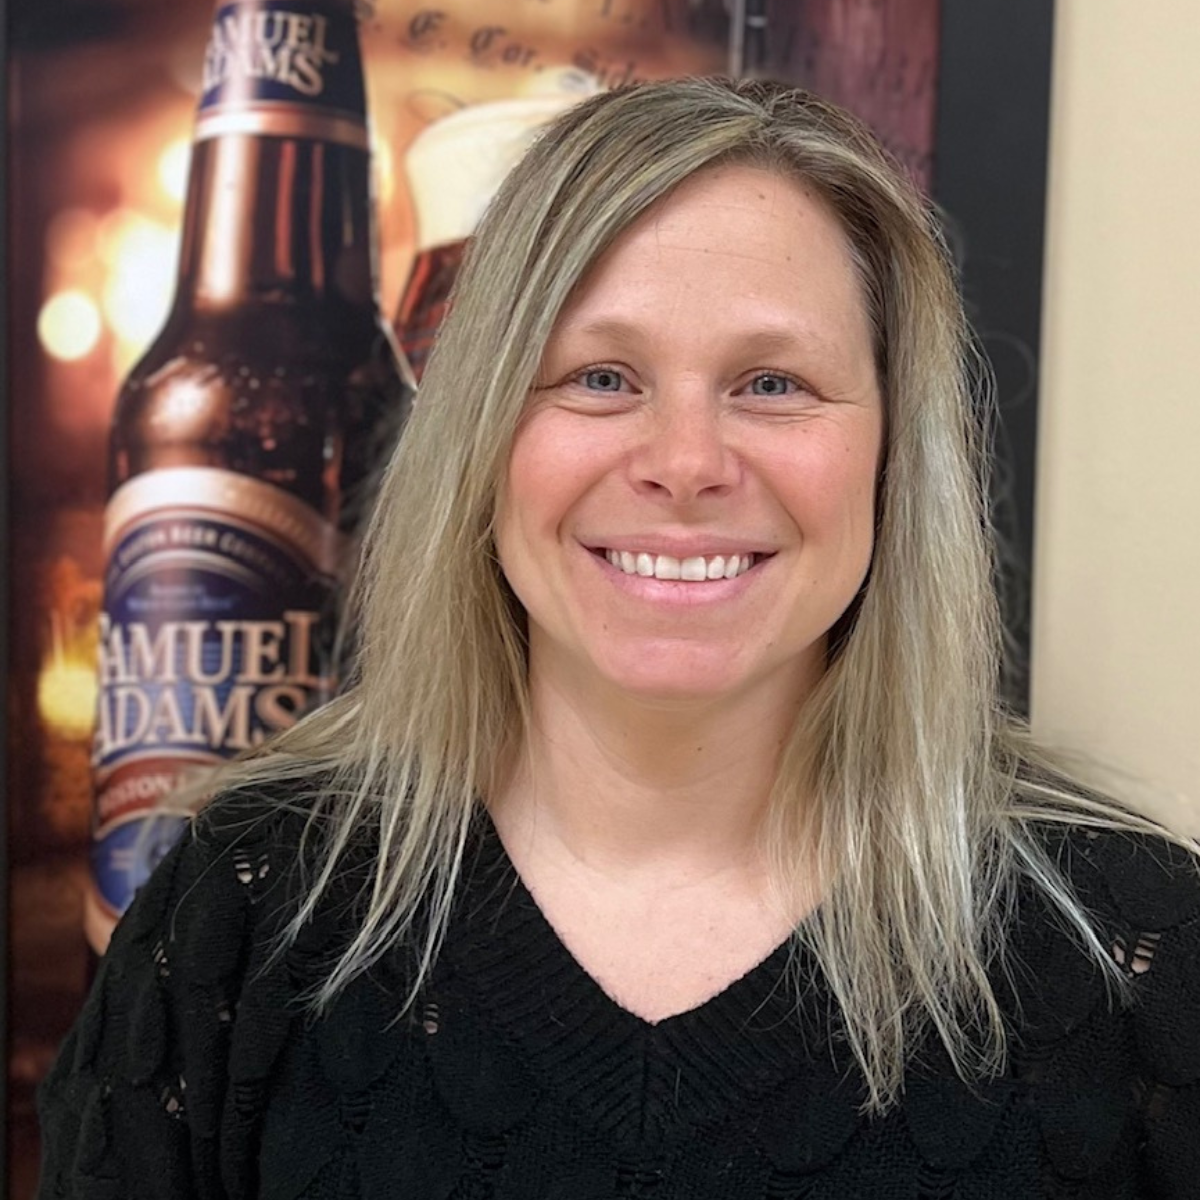 Tara Sperandio of Boston Beer joins Canary's Rachel Schneider to talk about why Boston Beer chose an employee relief fund to support worker well-being